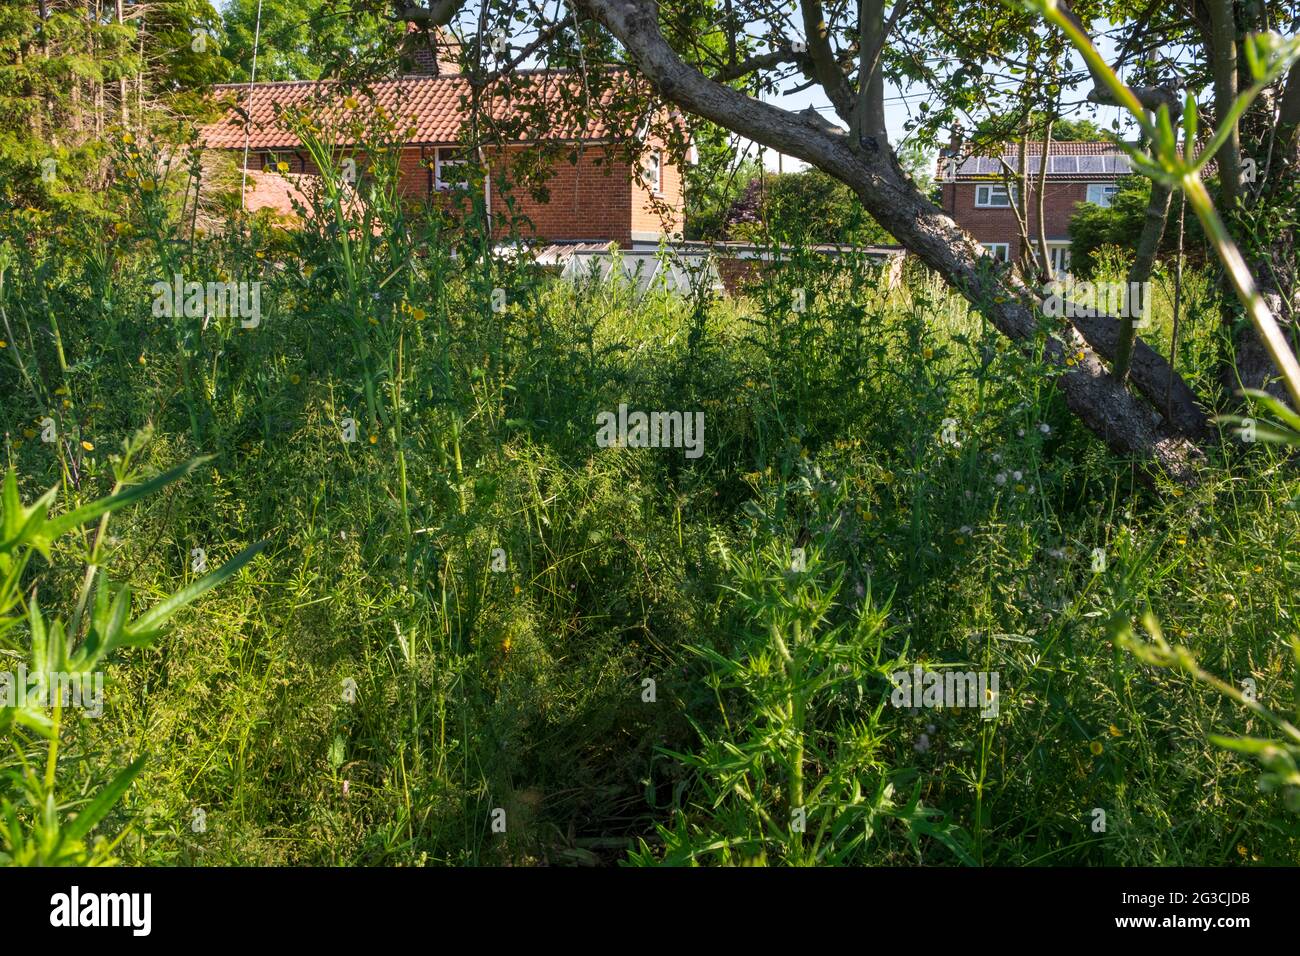 A neglected and overgrown with weeds garden. England, UK. Stock Photo